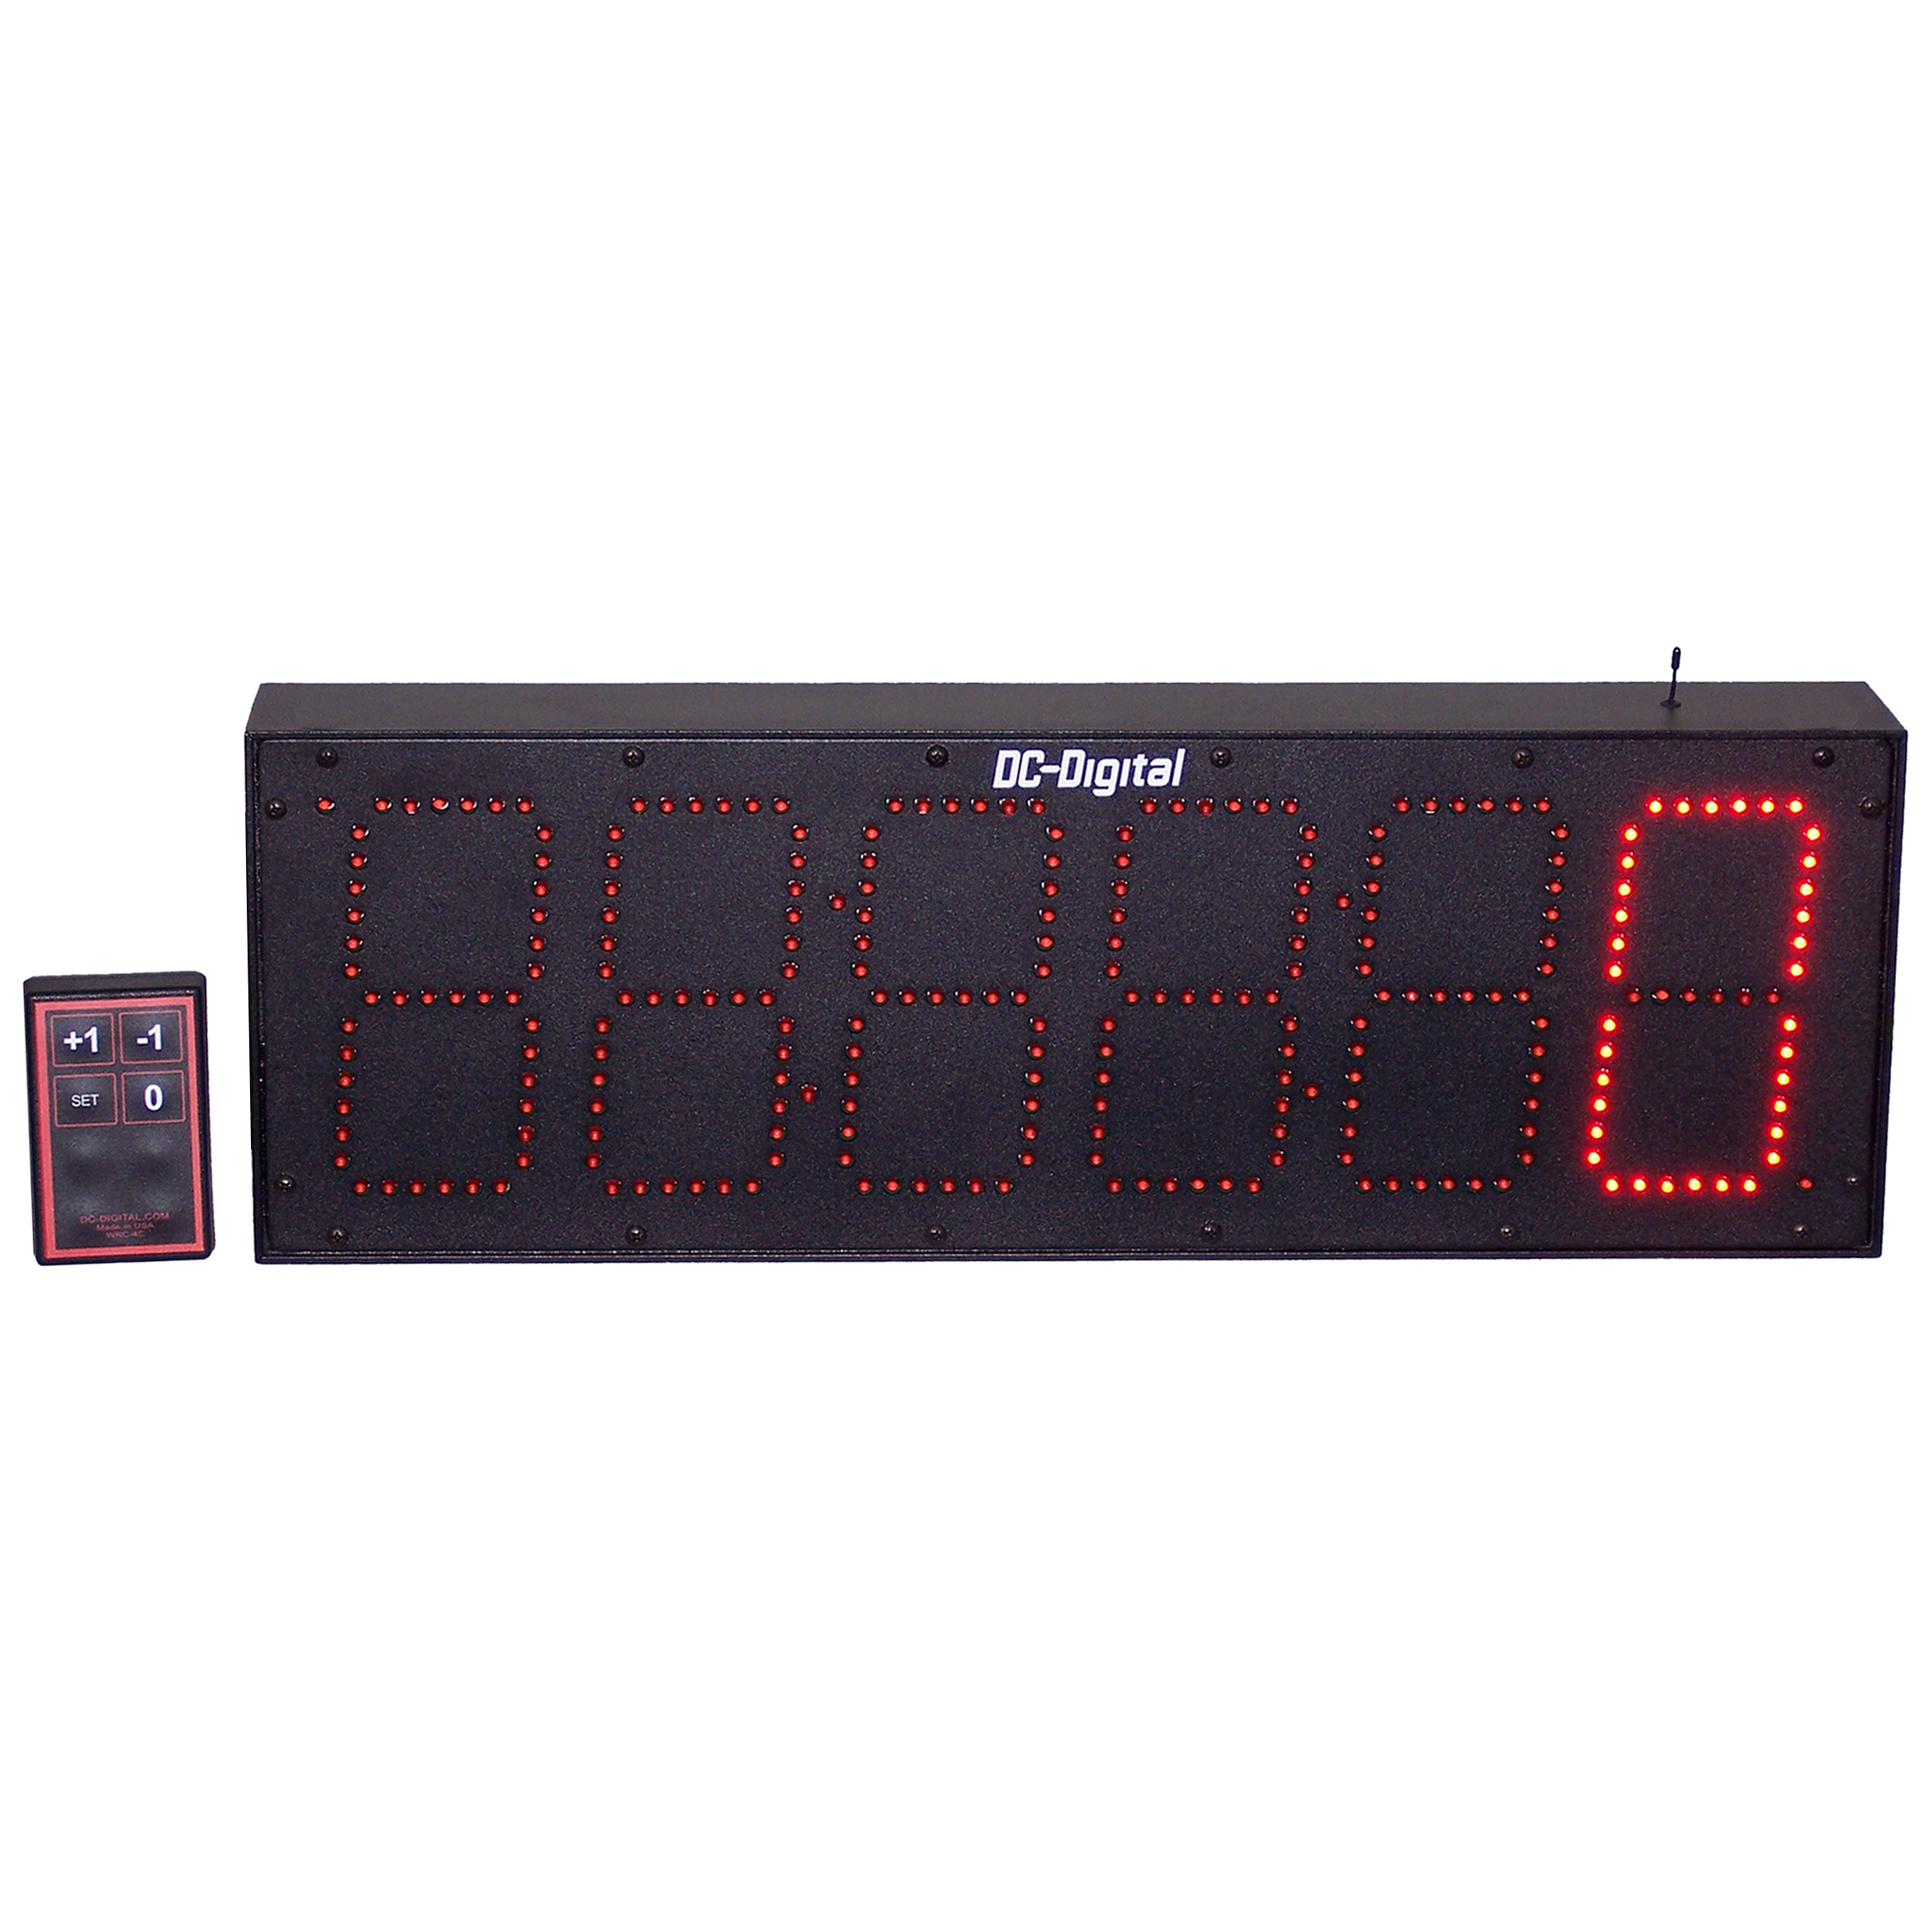 6-6 Inch Digit LED Digital Counter with wireless handheld controls